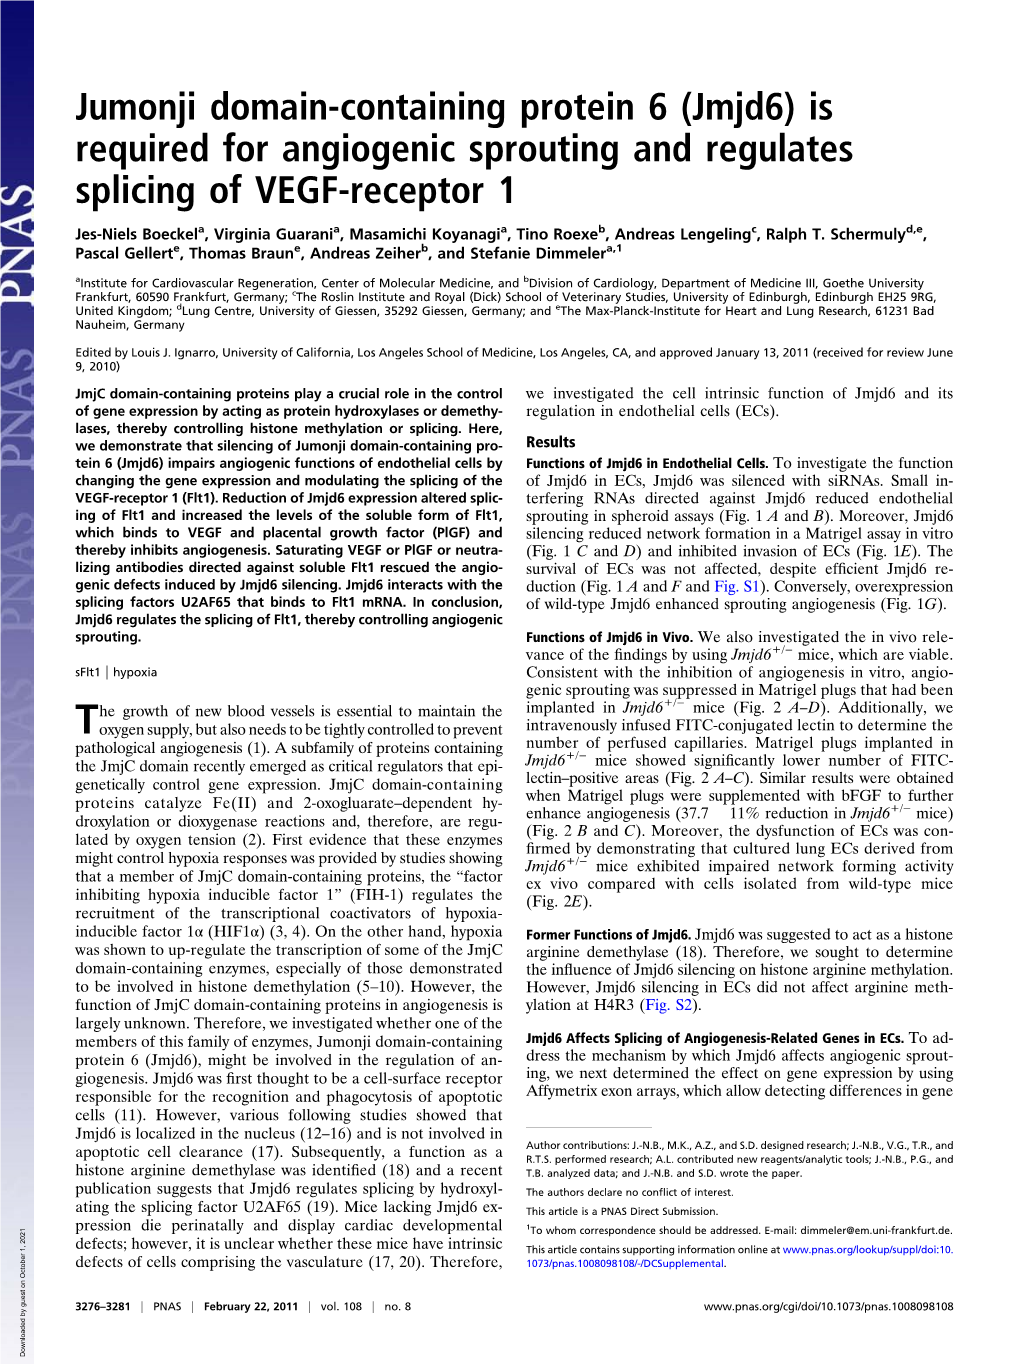 Jumonji Domain-Containing Protein 6 (Jmjd6) Is Required for Angiogenic Sprouting and Regulates Splicing of VEGF-Receptor 1